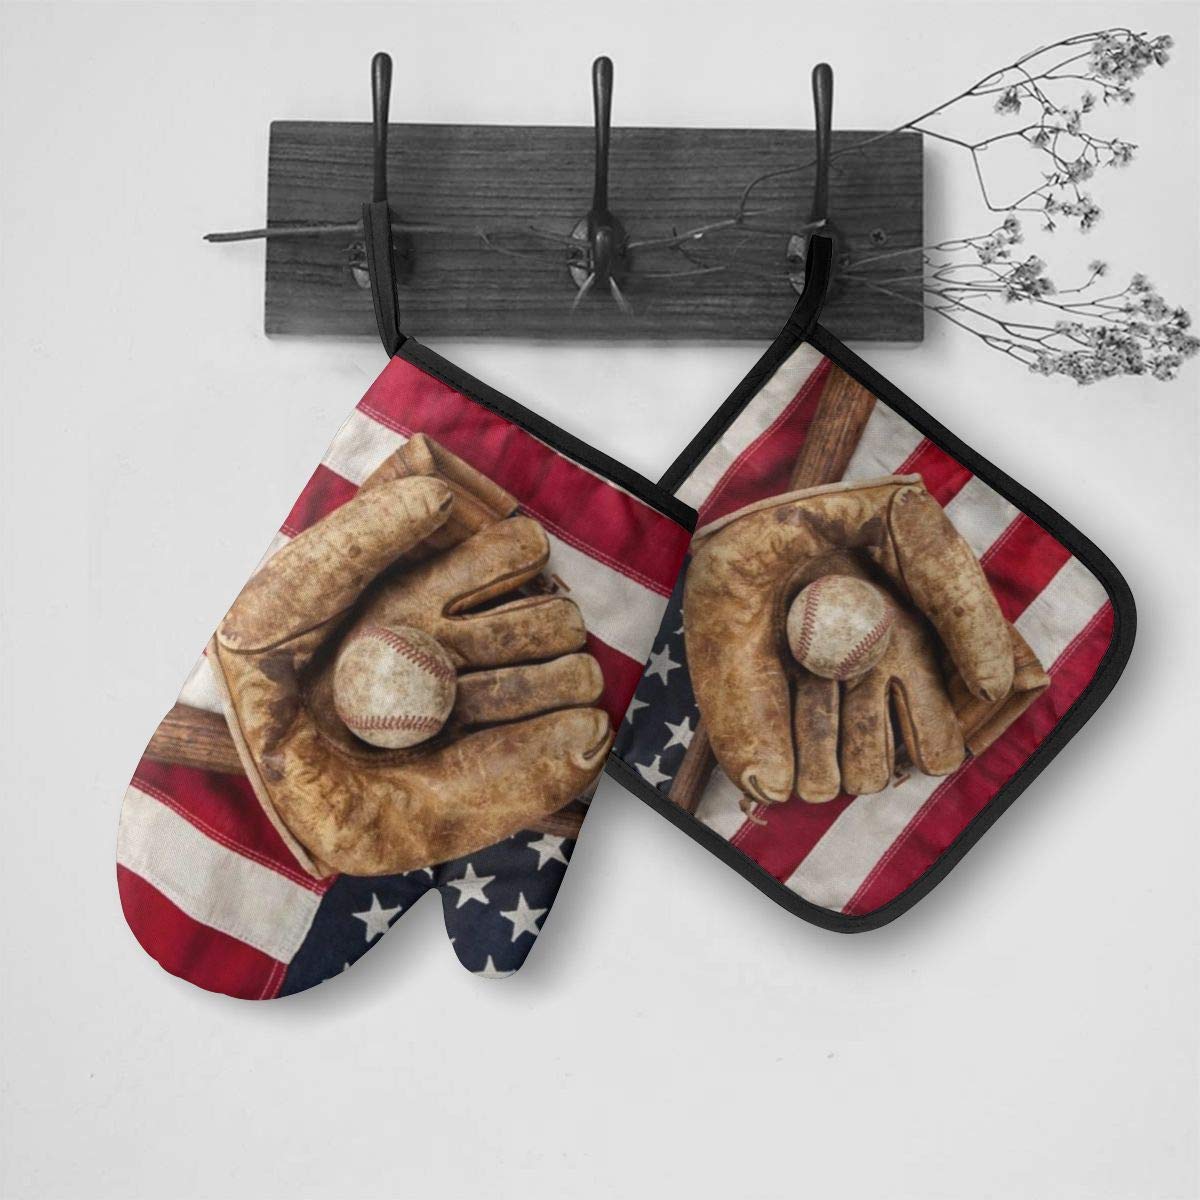 Vintage Baseball with USA American Flag Oven Mitts and Pot Holders Sets Heat Resistant Kitchen Oven Gloves Mats for Holiday Cooking Baking BBQ